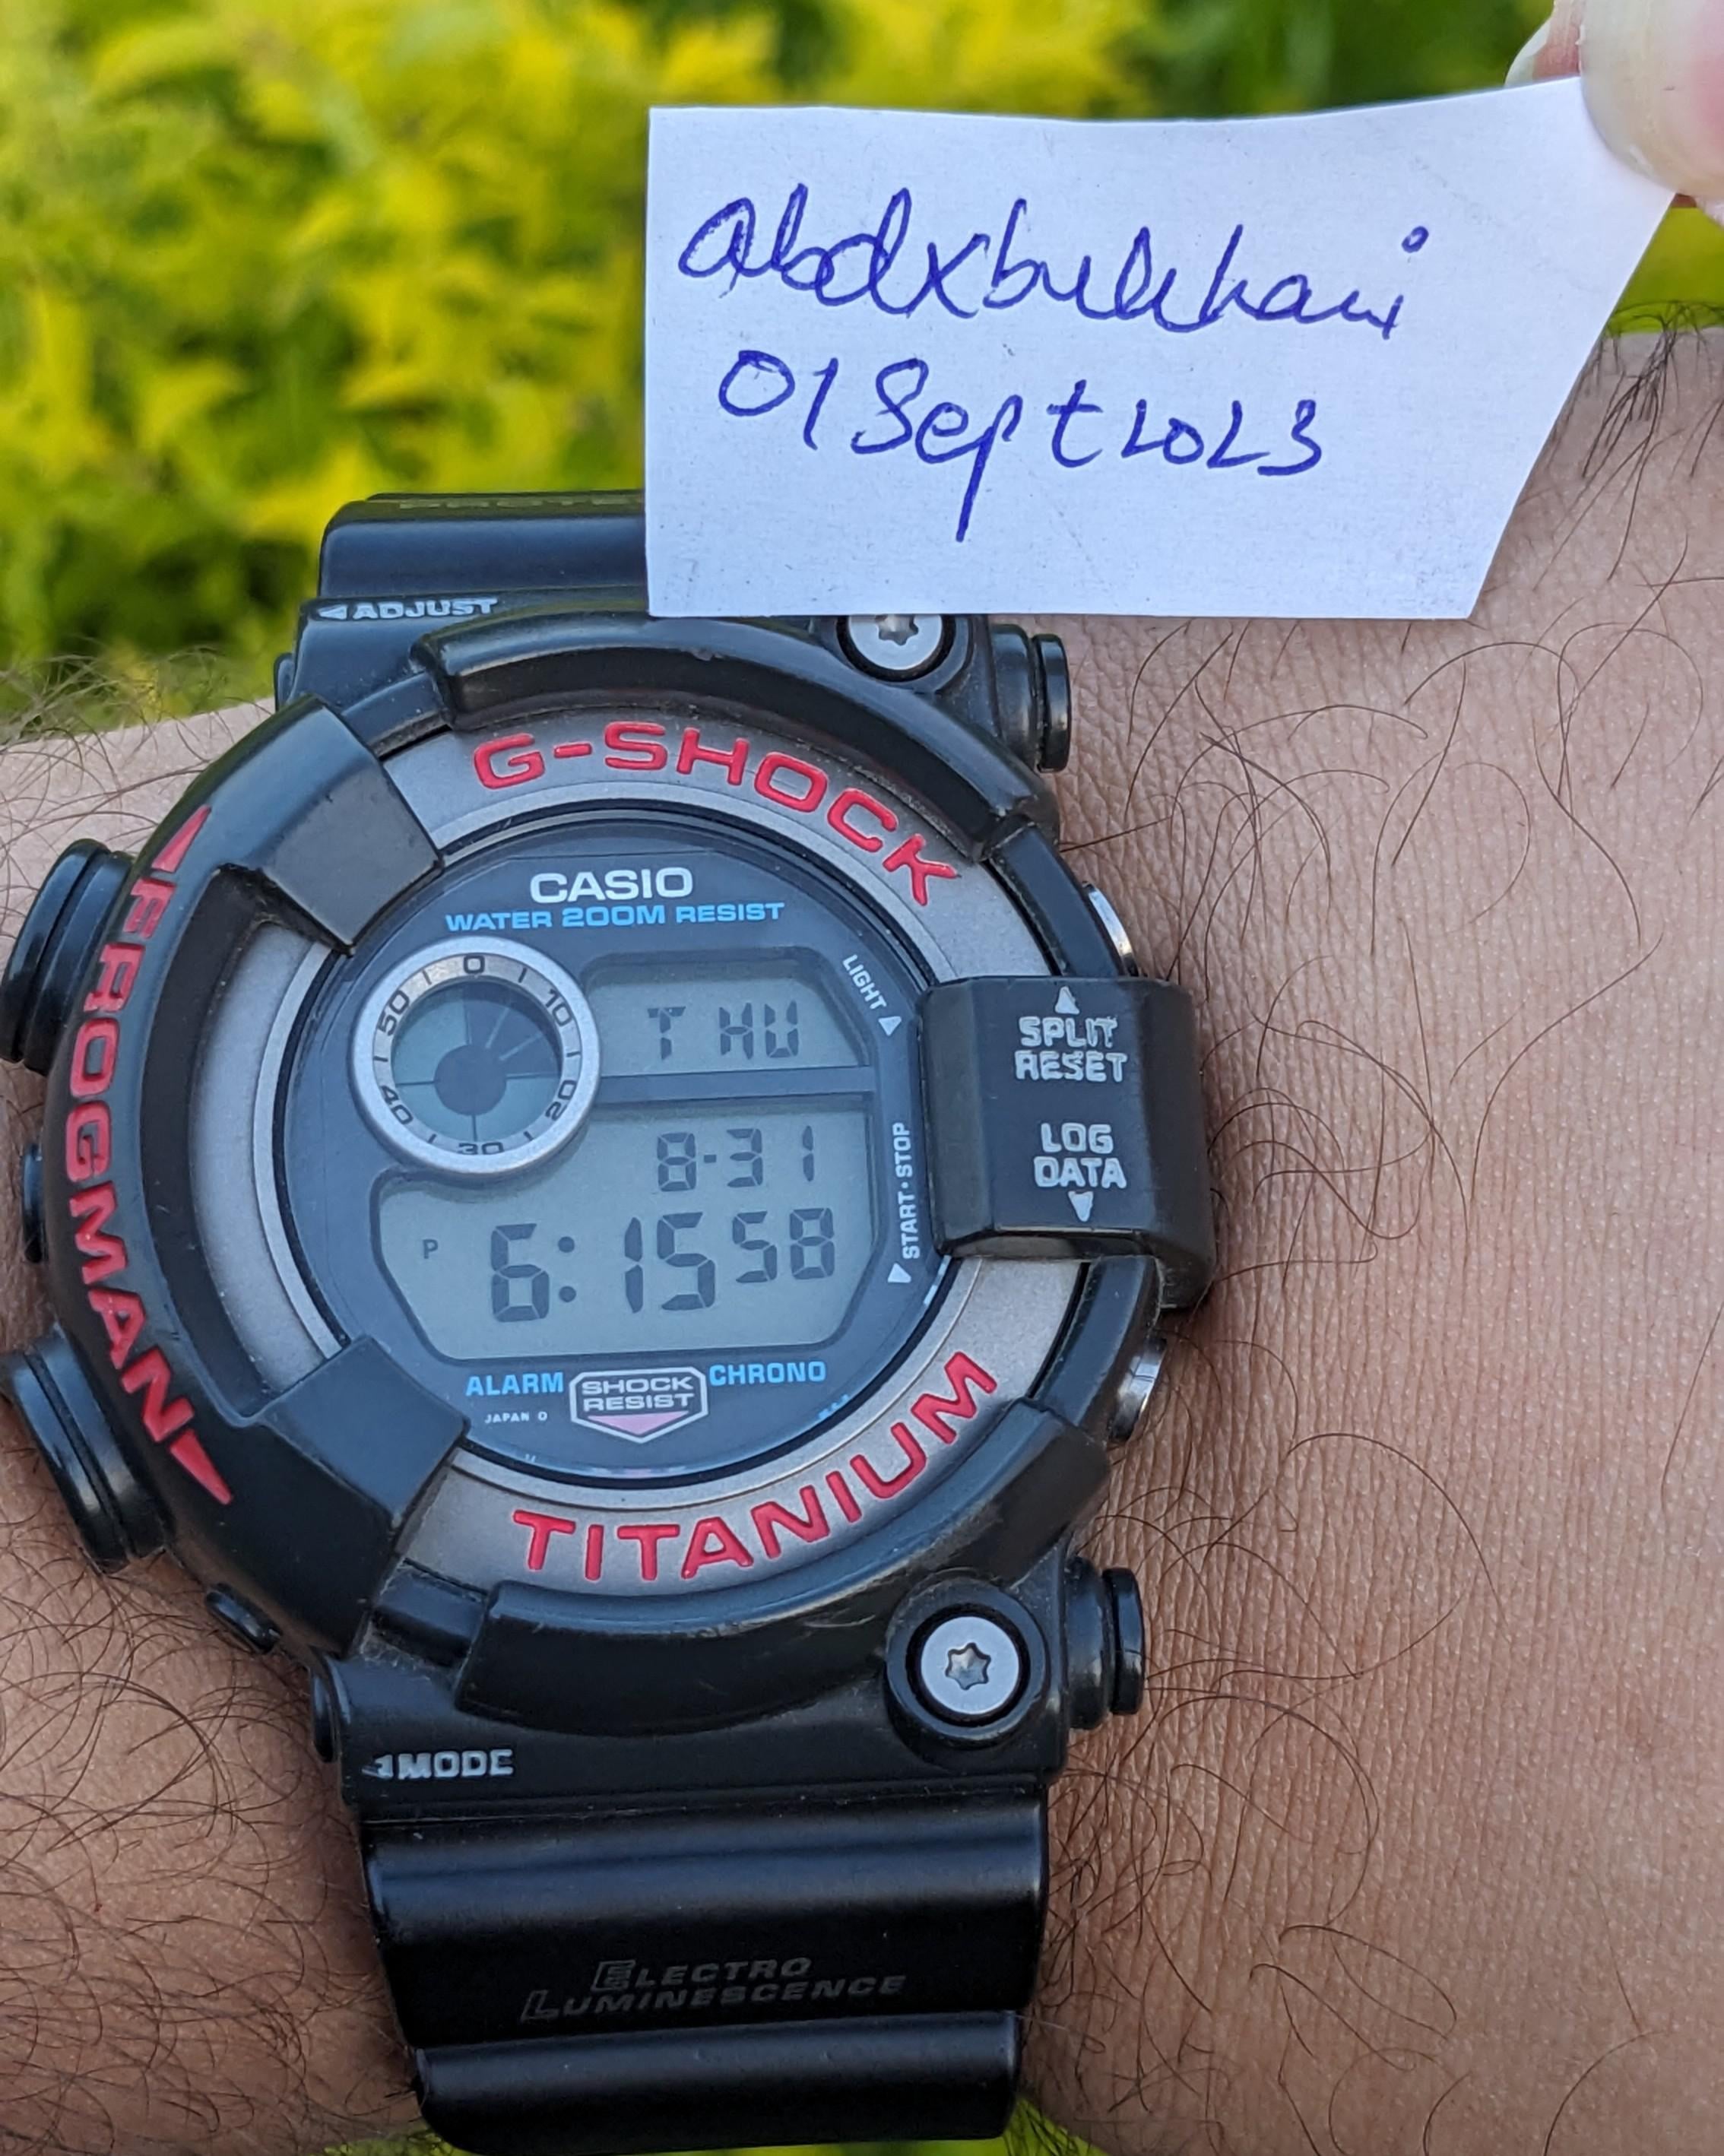 WTS] CLEANEST G-Shock FROGMAN DW-8200 -- 199 USD ONLY yeah you